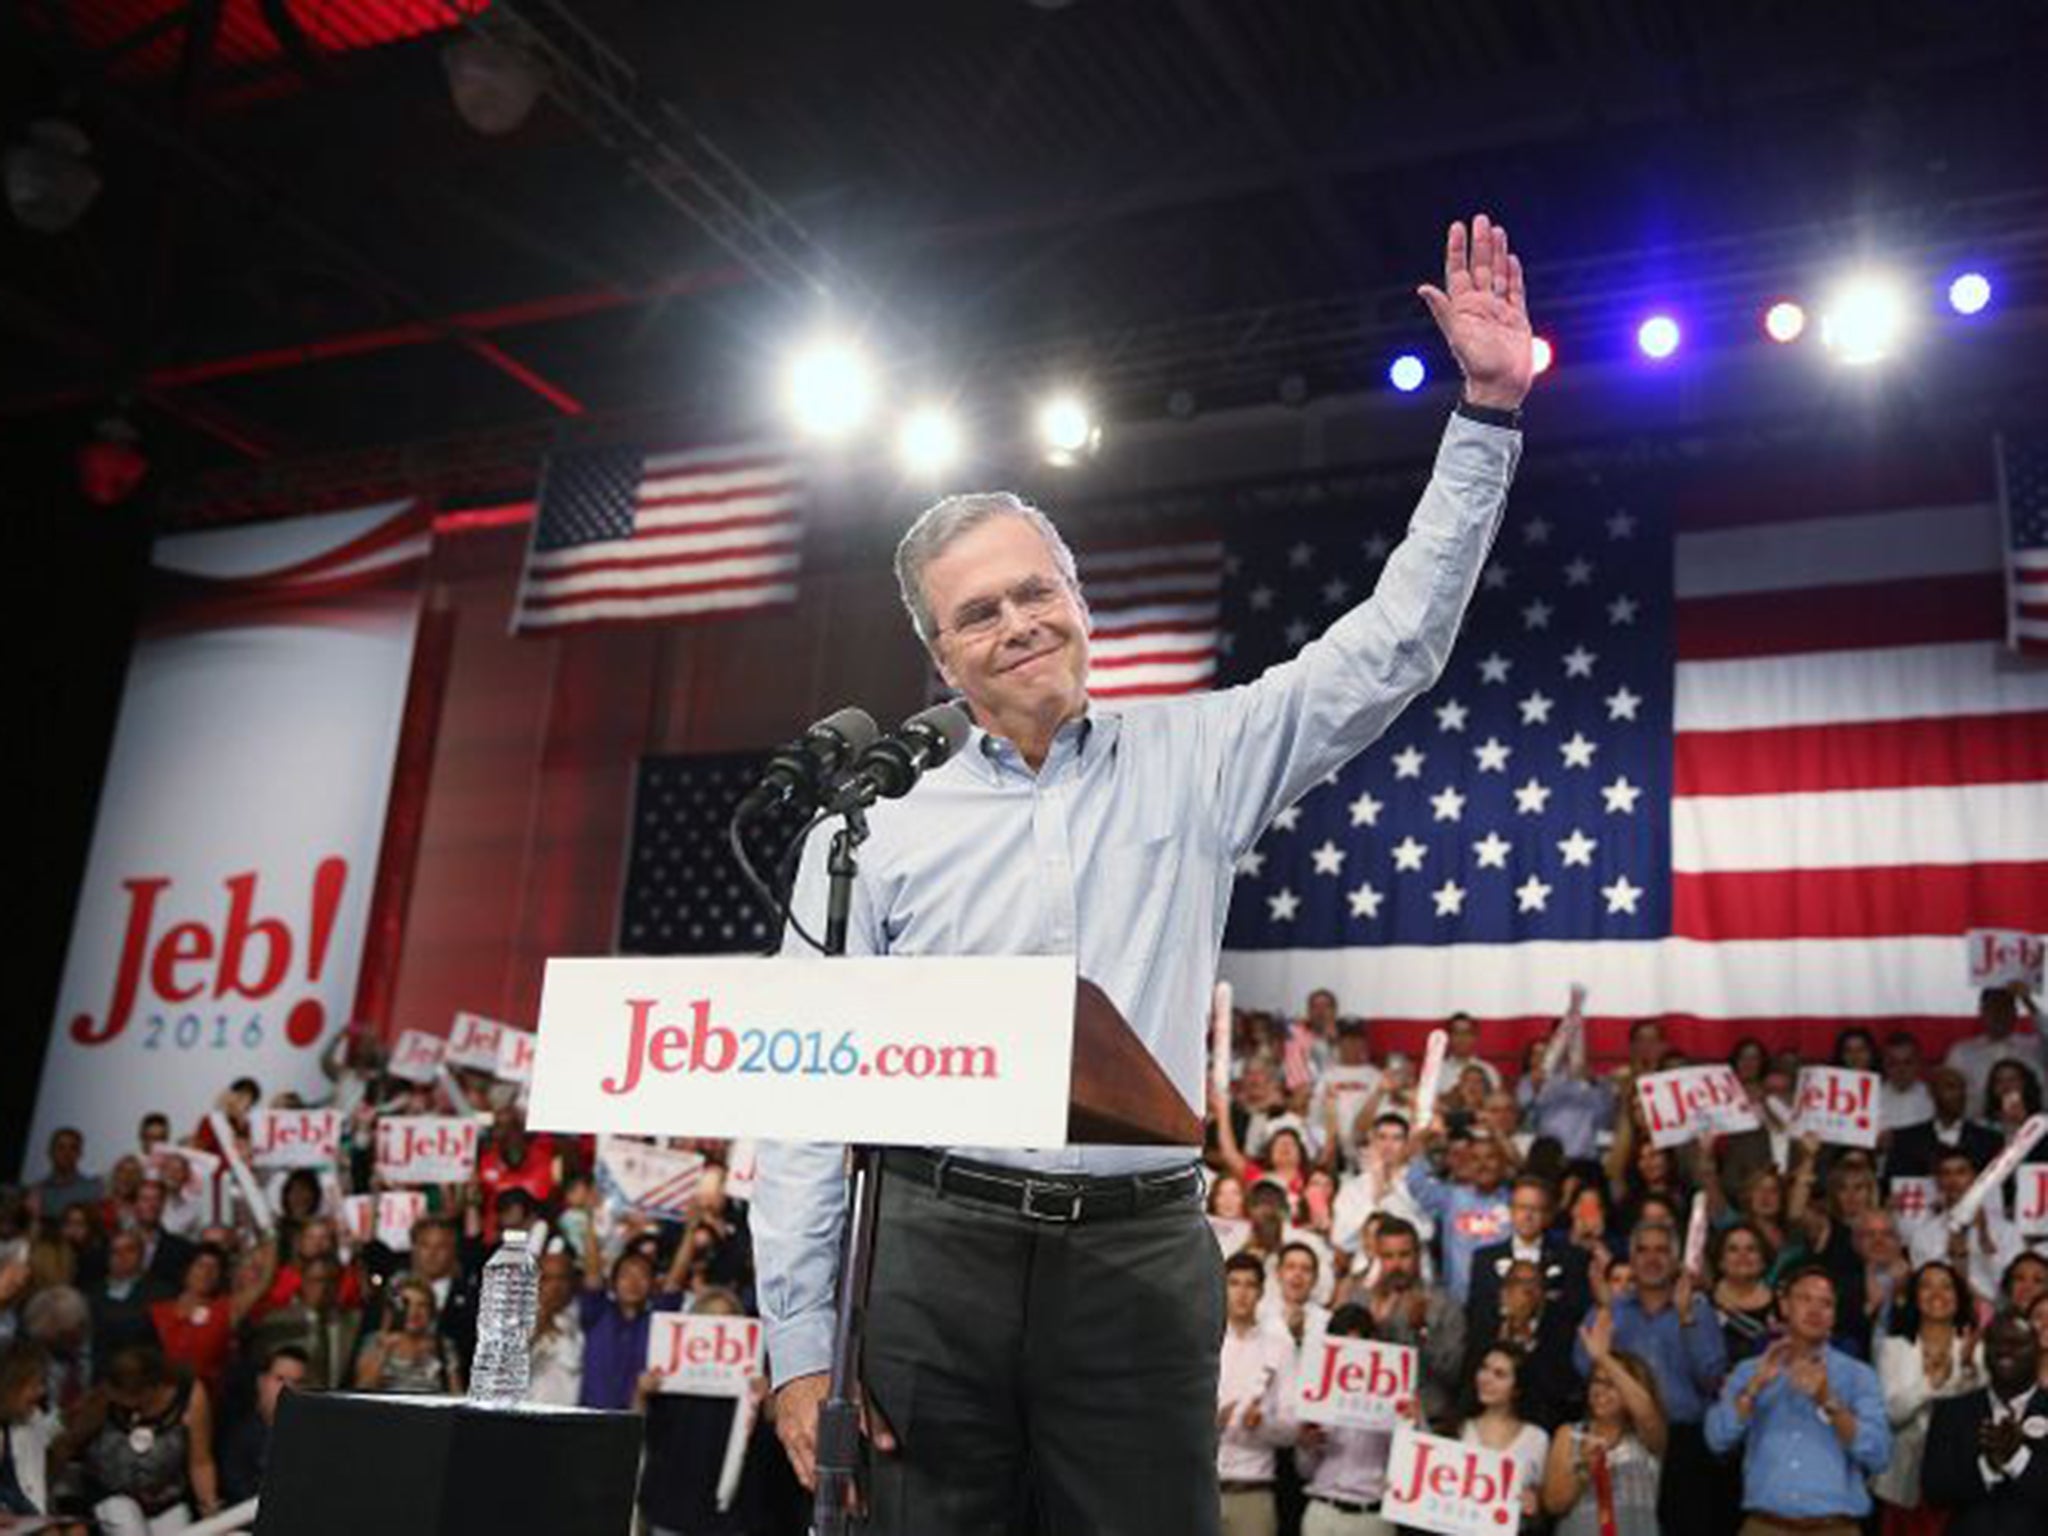 Jeb Bush's campaign will emphasise both his conservative record as a former governor of Florida and his commitment to building a more inclusive Republican Party